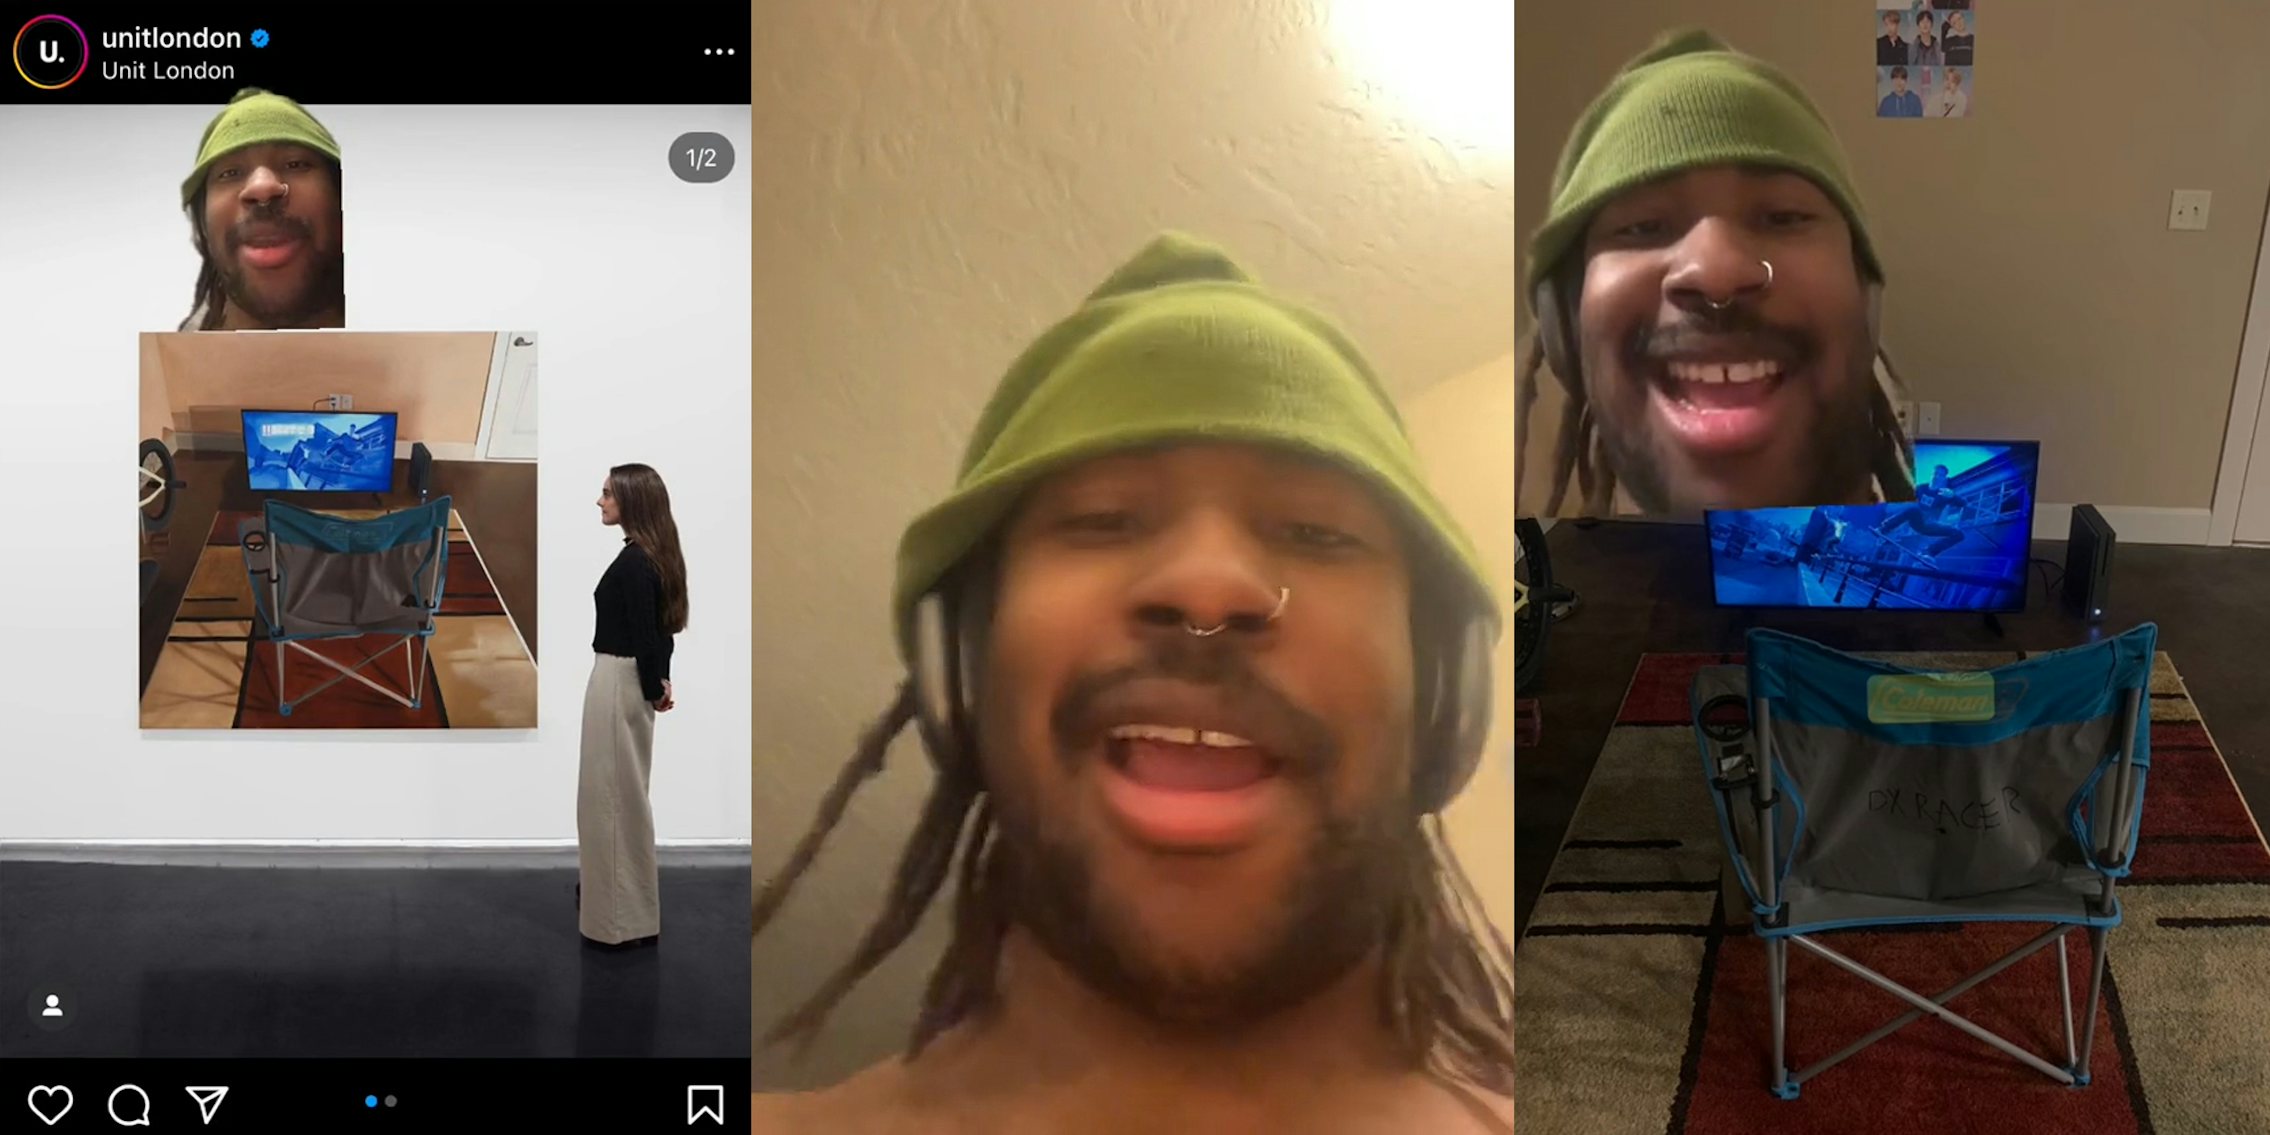 man greenscreen TikTok over Instagram post by unitlondon of woman looking at paintng of a living room on a wall (l) man speaking (c) man greenscreen TikTok over image of his living room (r)